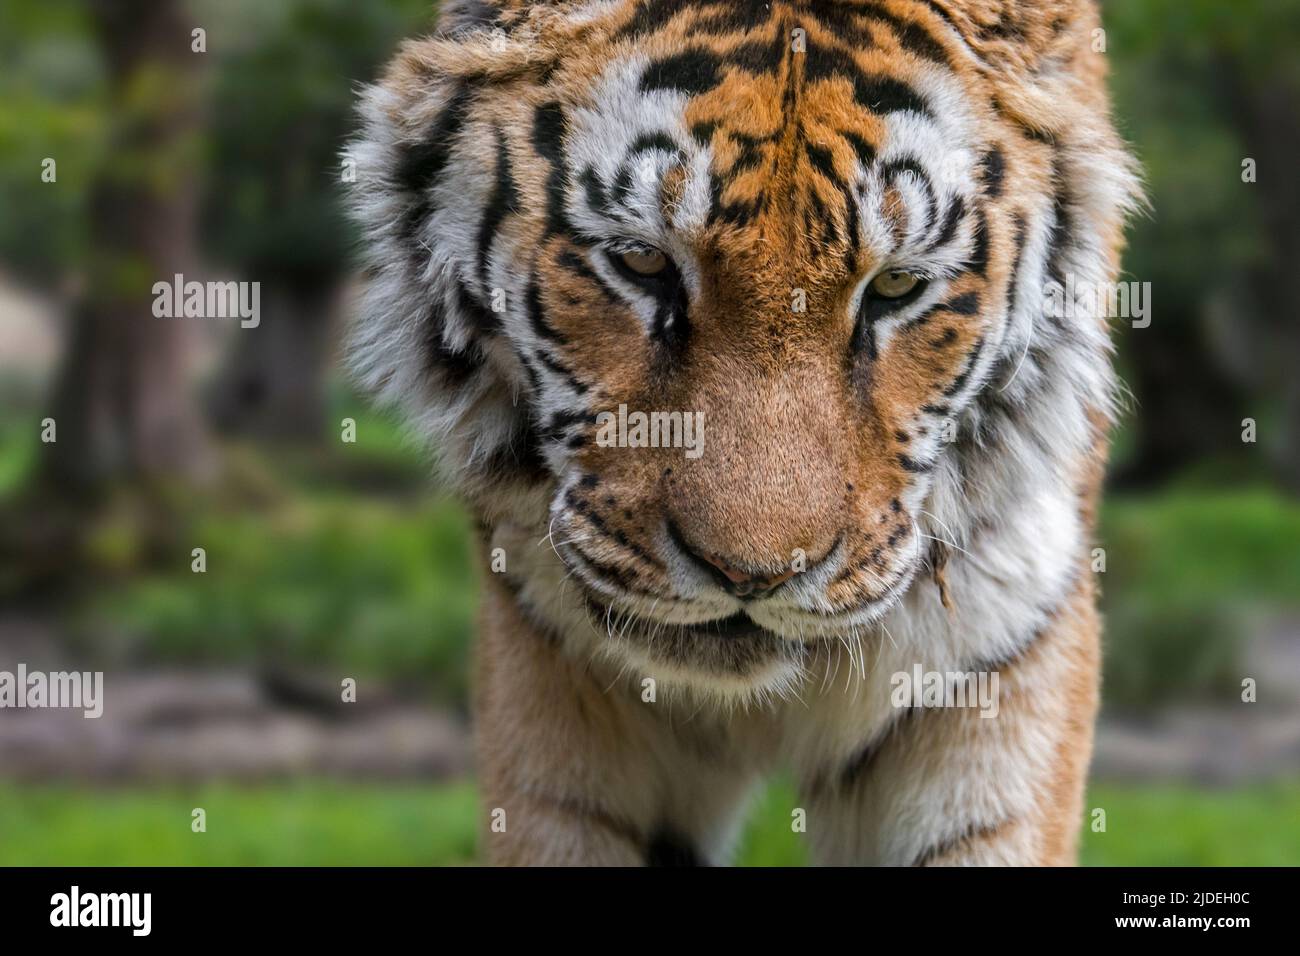 Siberian tiger (Panthera tigris altaica) close-up portrait in forest Stock Photo